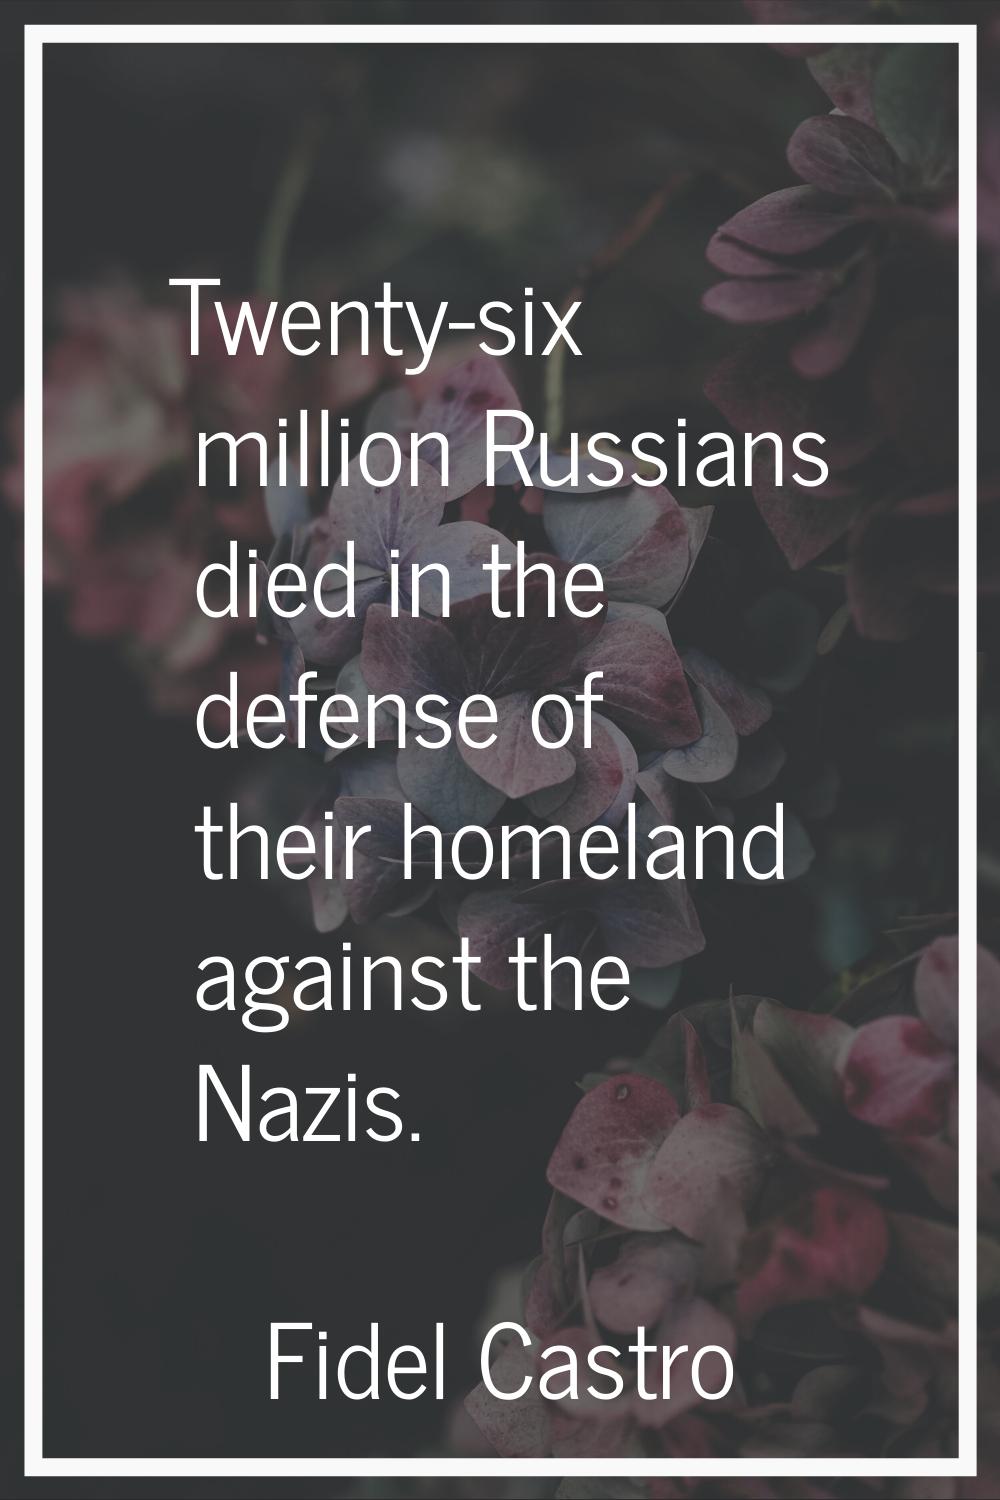 Twenty-six million Russians died in the defense of their homeland against the Nazis.